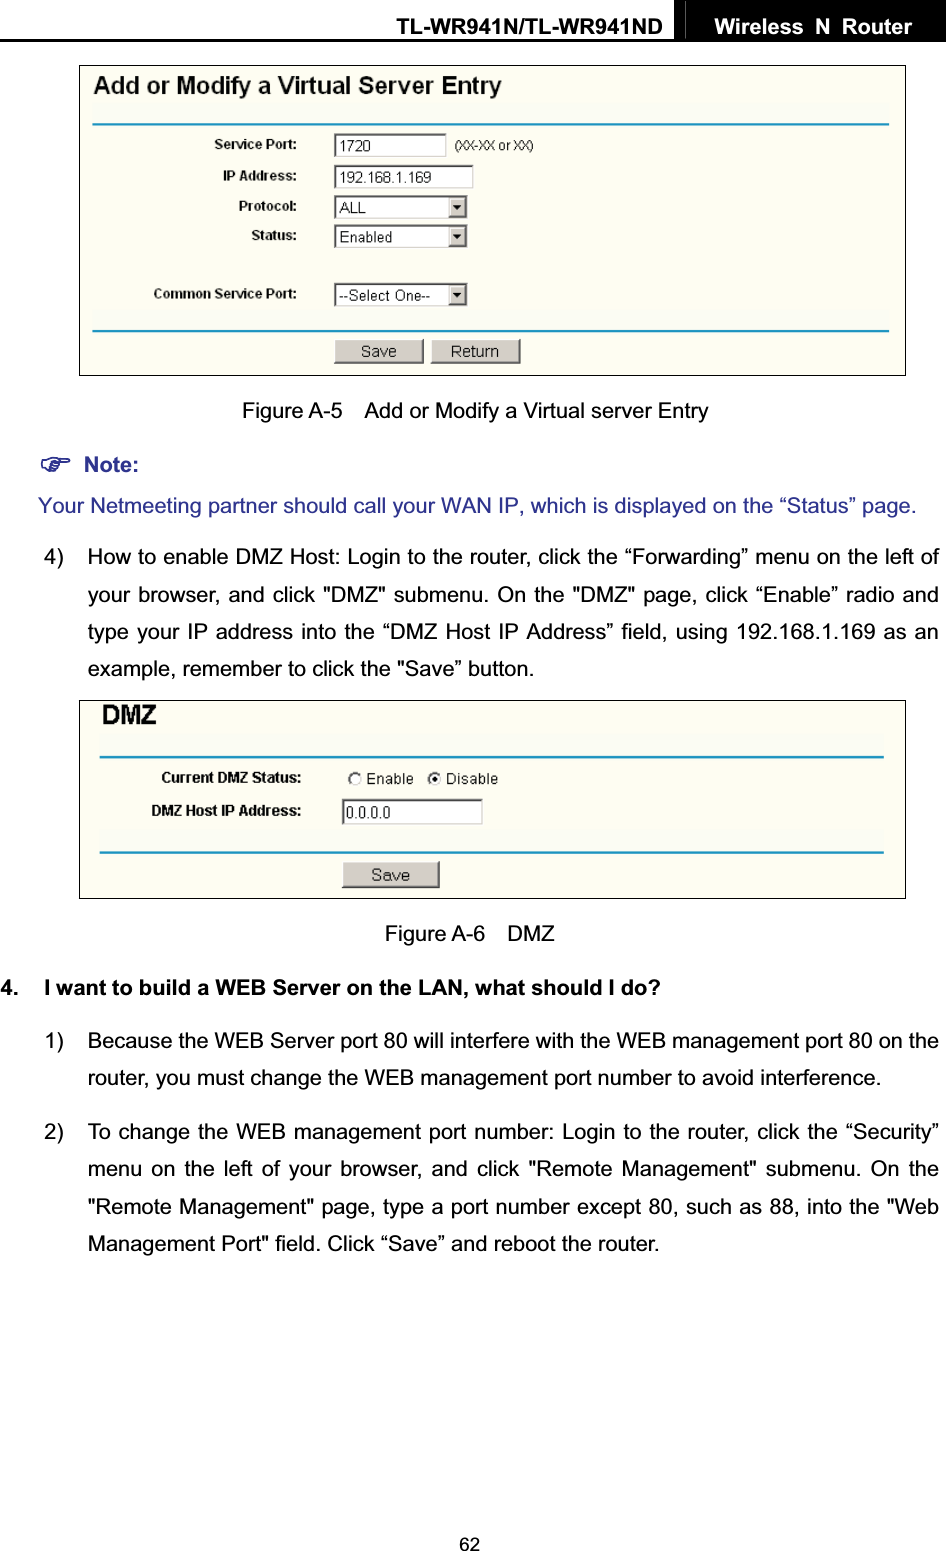 TL-WR941N/TL-WR941ND  Wireless N Router  62  Figure A-5    Add or Modify a Virtual server Entry )Note:Your Netmeeting partner should call your WAN IP, which is displayed on the “Status” page.4)  How to enable DMZ Host: Login to the router, click the “Forwarding” menu on the left of your browser, and click &quot;DMZ&quot; submenu. On the &quot;DMZ&quot; page, click “Enable” radio and type your IP address into the “DMZ Host IP Address” field, using 192.168.1.169 as an example, remember to click the &quot;Save” button.   Figure A-6  DMZ 4.  I want to build a WEB Server on the LAN, what should I do? 1)  Because the WEB Server port 80 will interfere with the WEB management port 80 on the router, you must change the WEB management port number to avoid interference. 2)  To change the WEB management port number: Login to the router, click the “Security” menu on the left of your browser, and click &quot;Remote Management&quot; submenu. On the &quot;Remote Management&quot; page, type a port number except 80, such as 88, into the &quot;Web Management Port&quot; field. Click “Save” and reboot the router. 